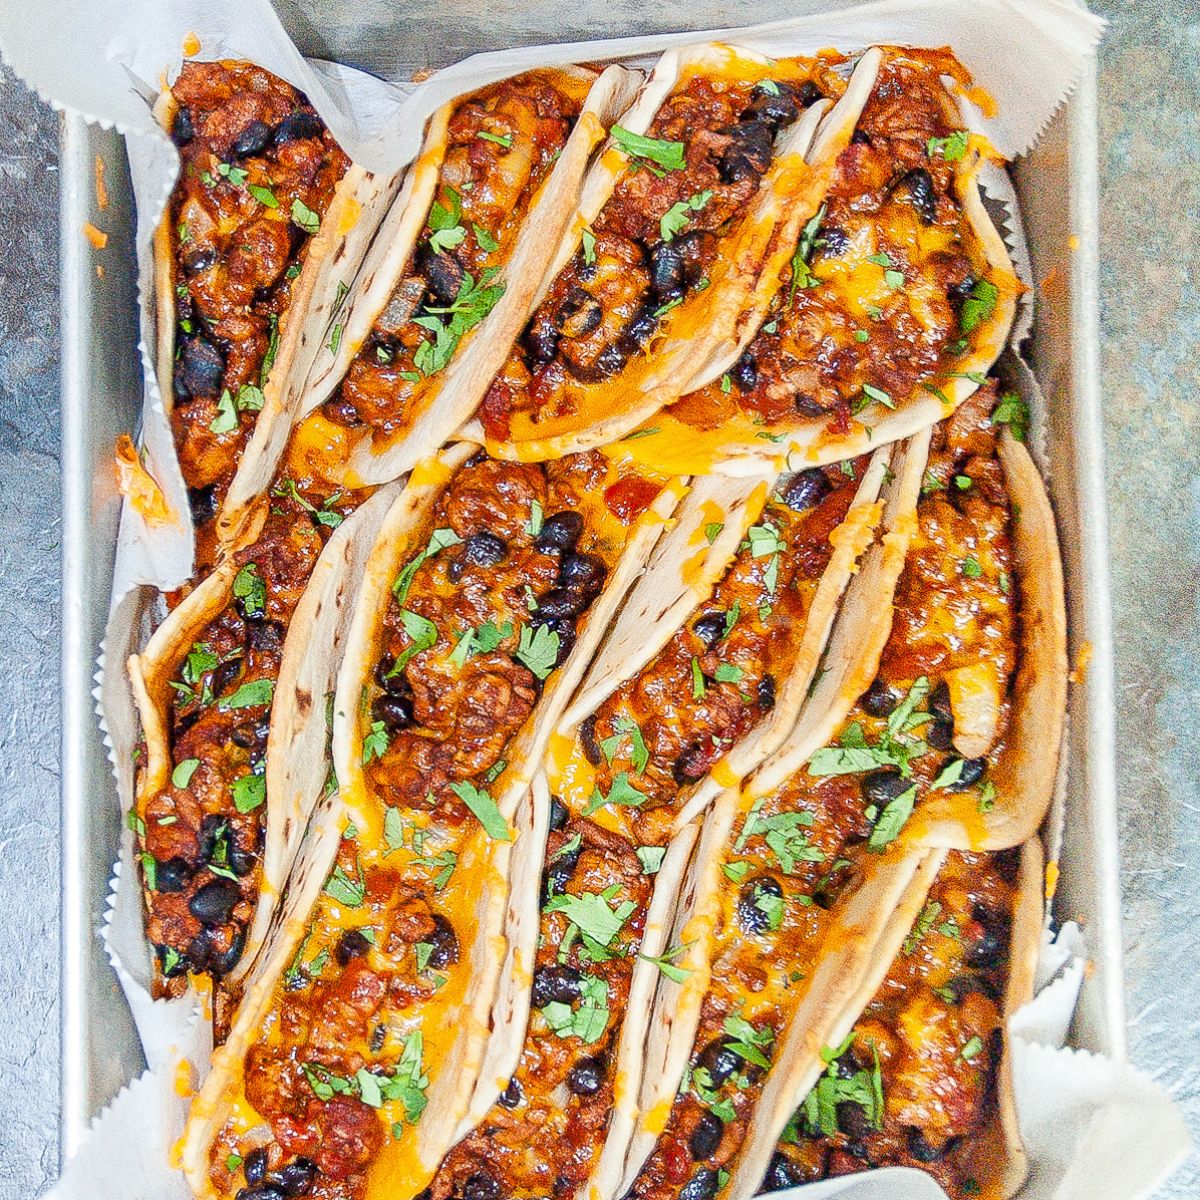 Baked tacos in a baking pan